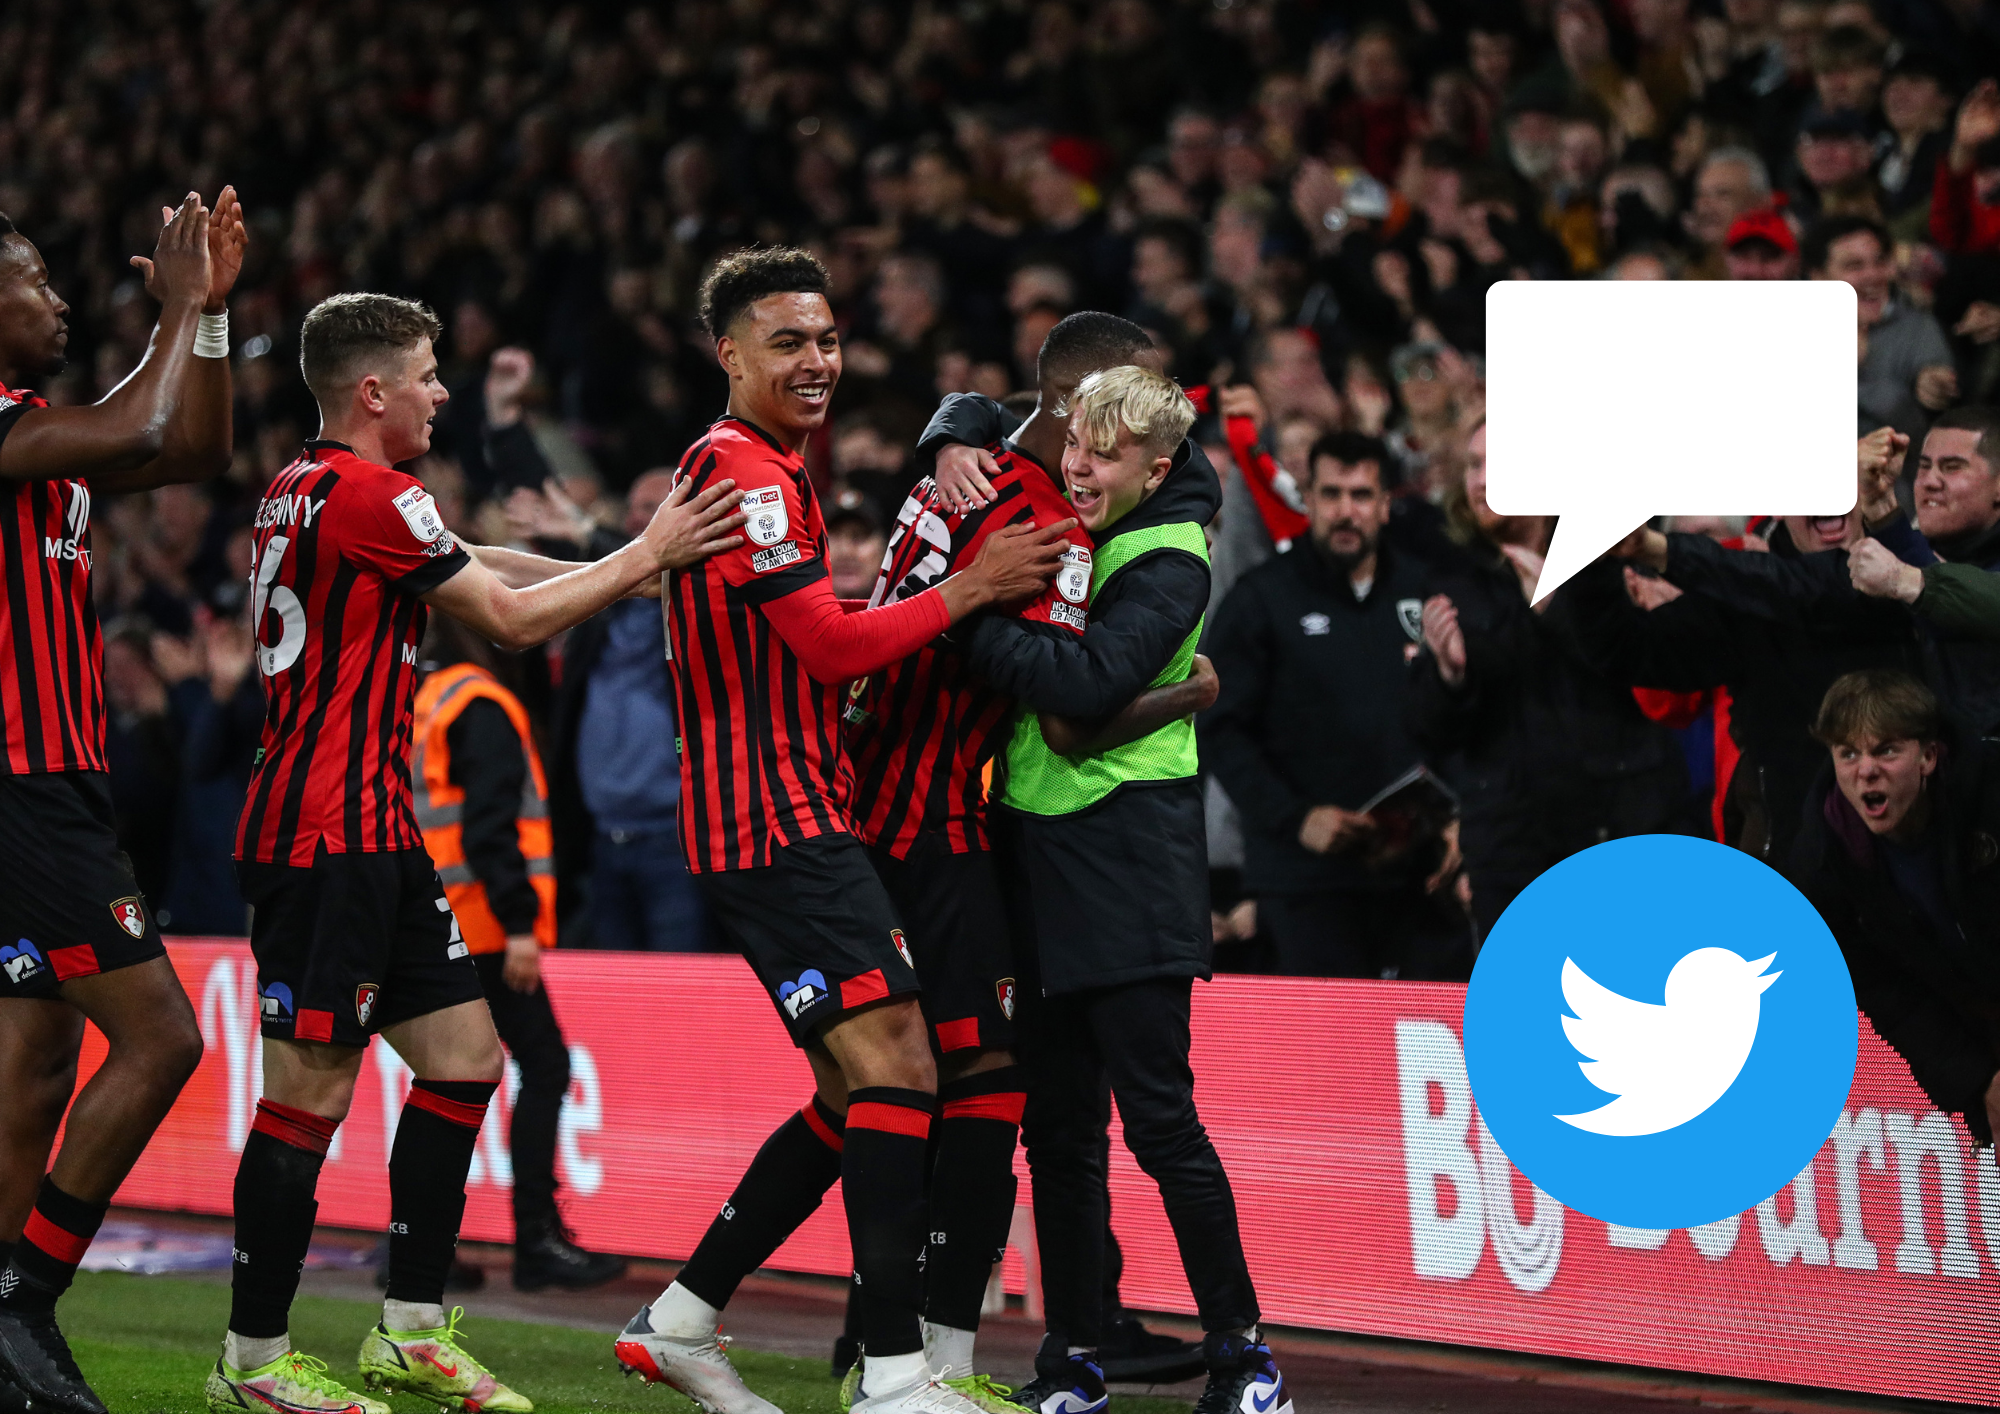 AFC Bournemouth fans react to 4-0 thumping over Swansea